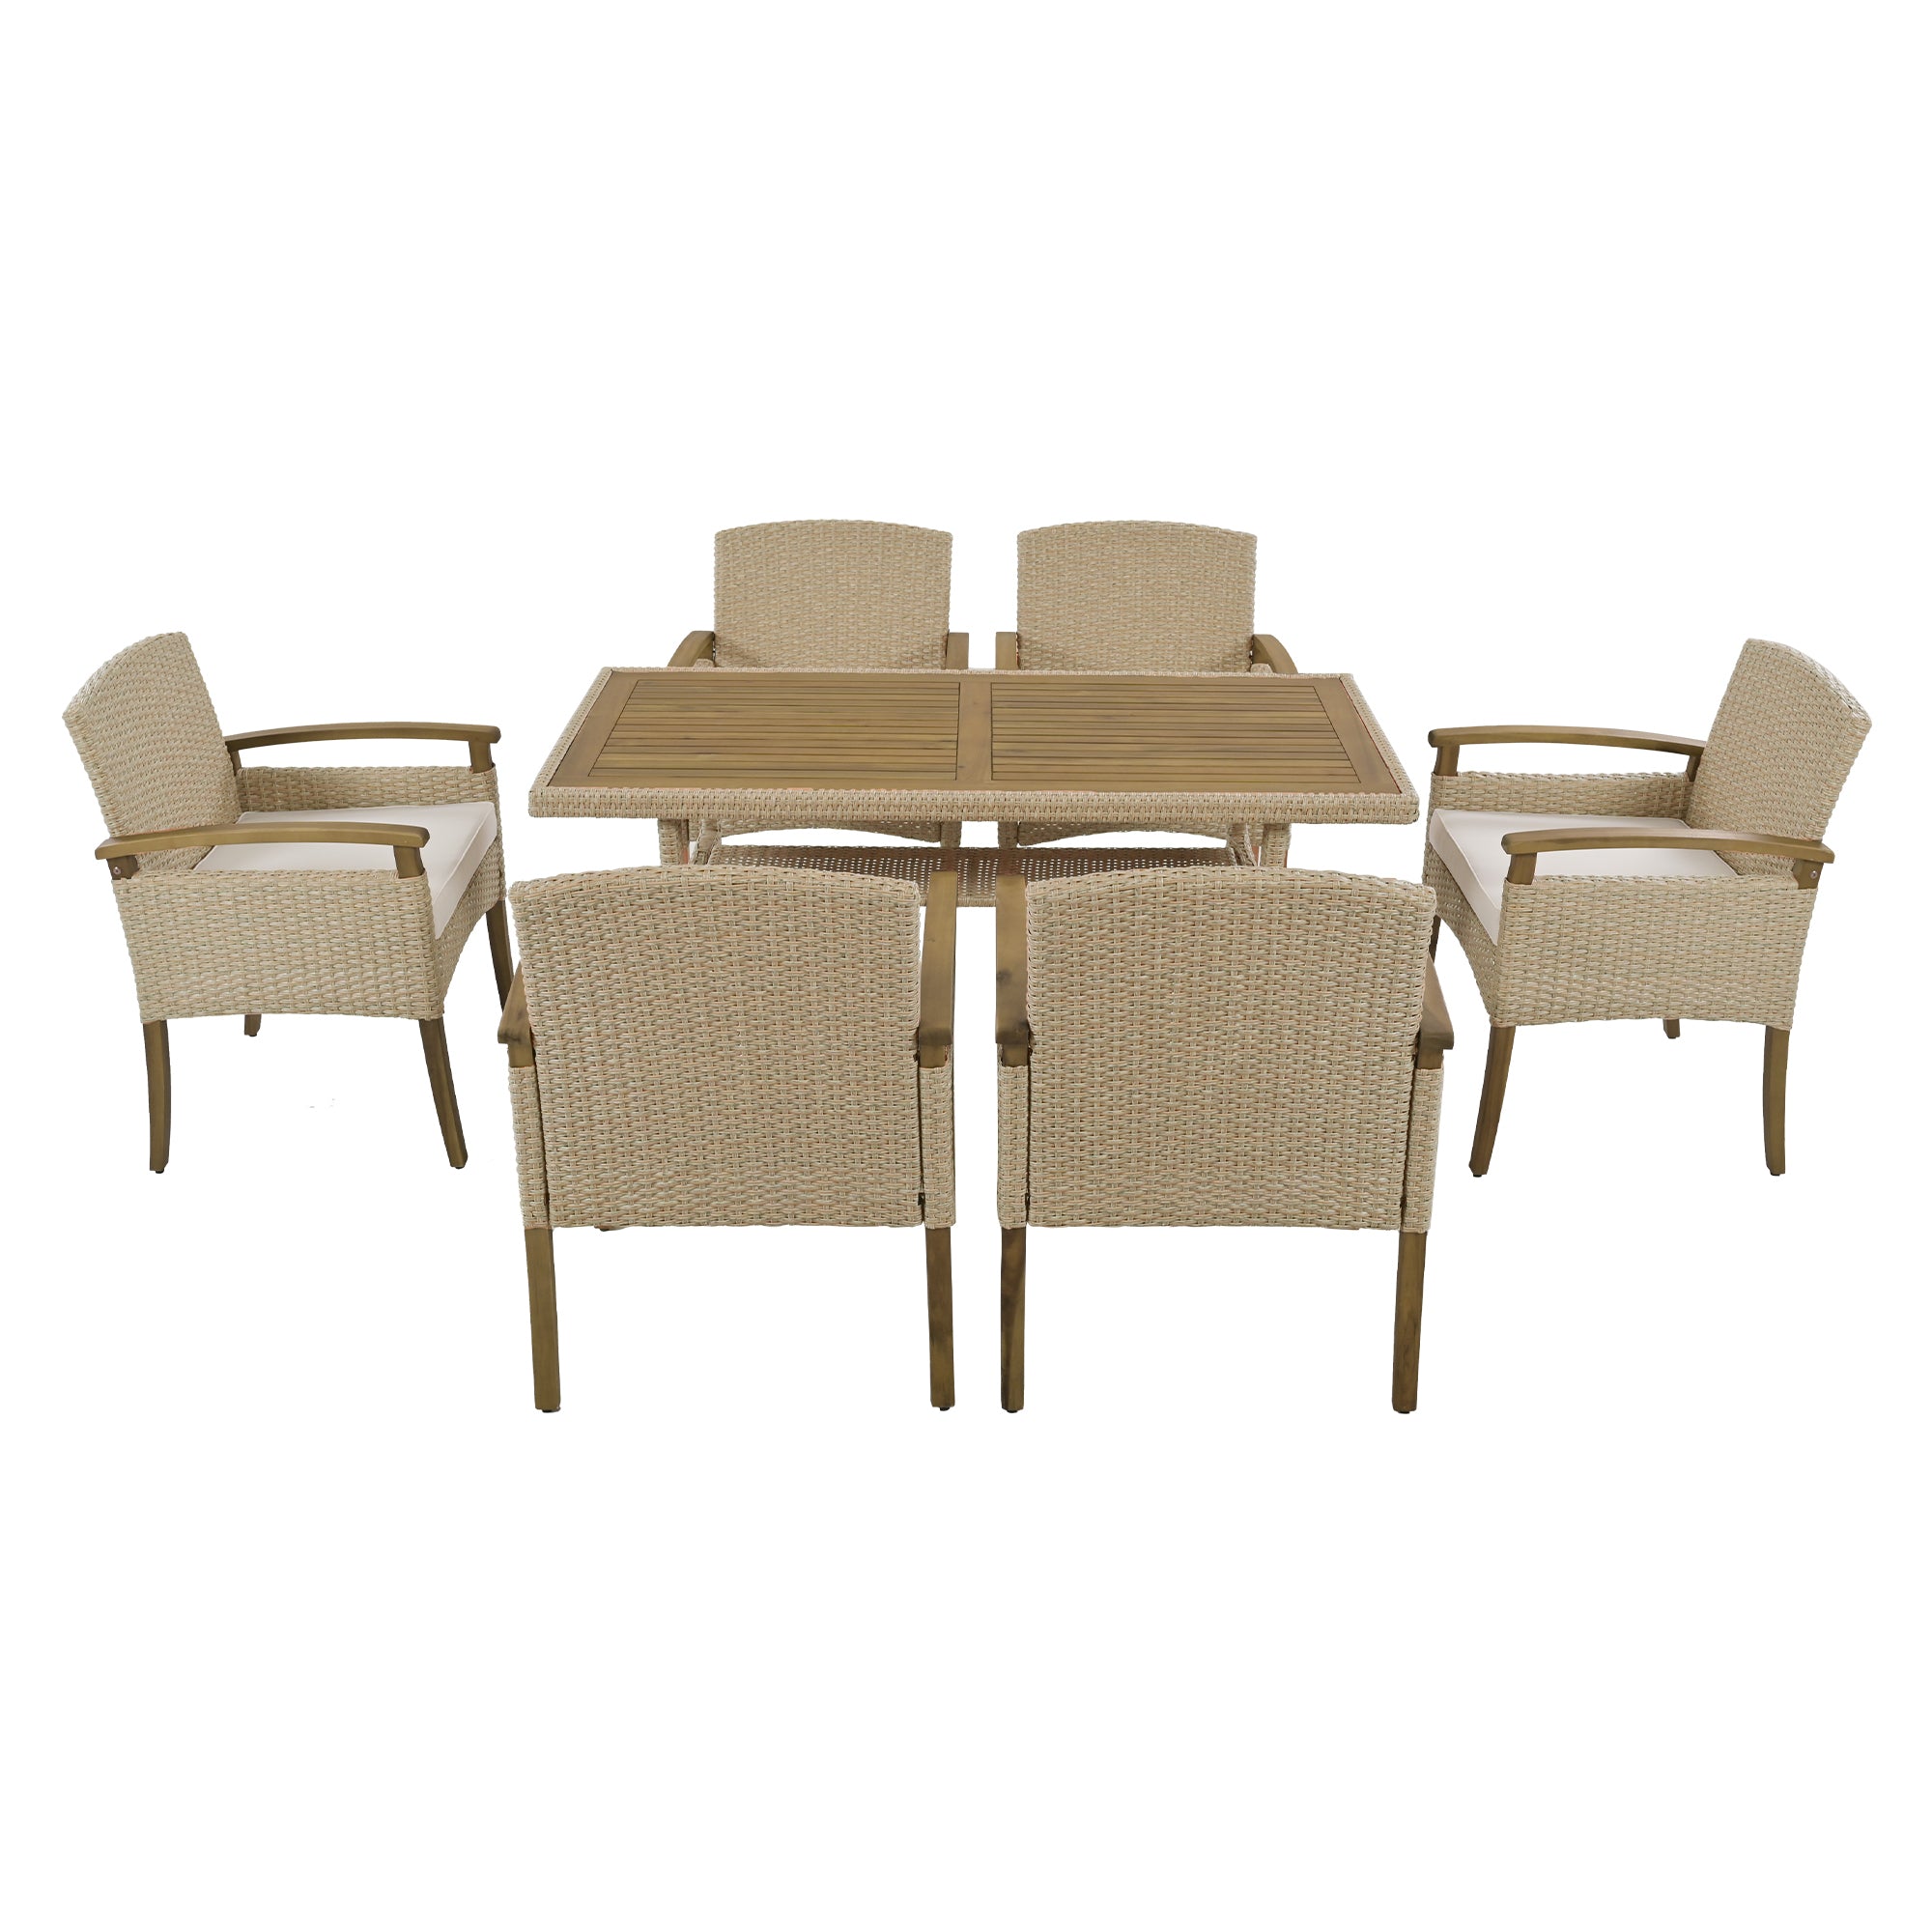 TOPMAX Outdoor Patio 7-Piece Dining Table Set All Weather PE Rattan Dining Set with Wood Tabletop and Cushions for 6, White